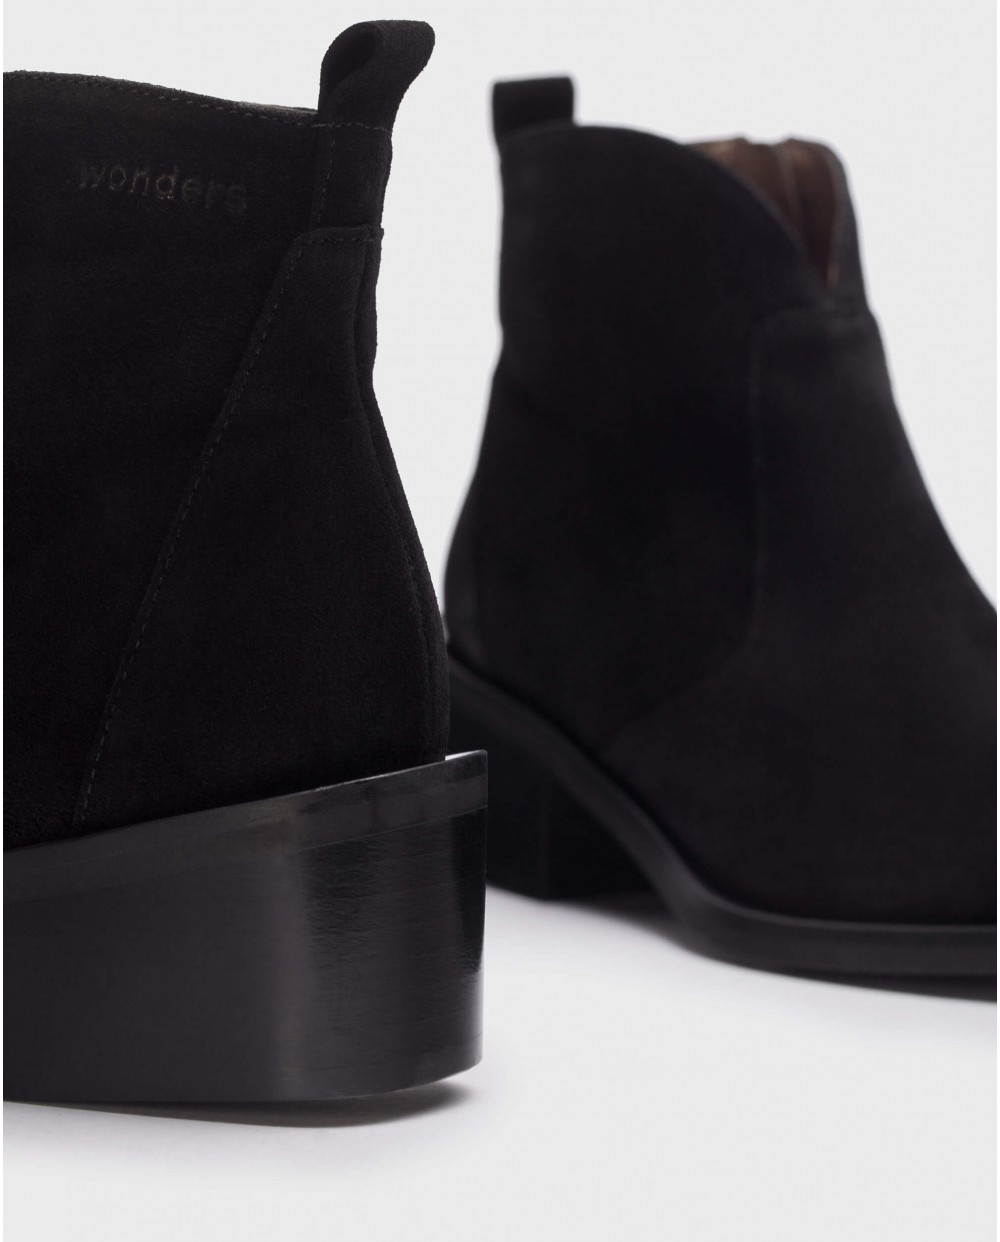 Wonders-Ankle Boots-Black Halley ankle boot